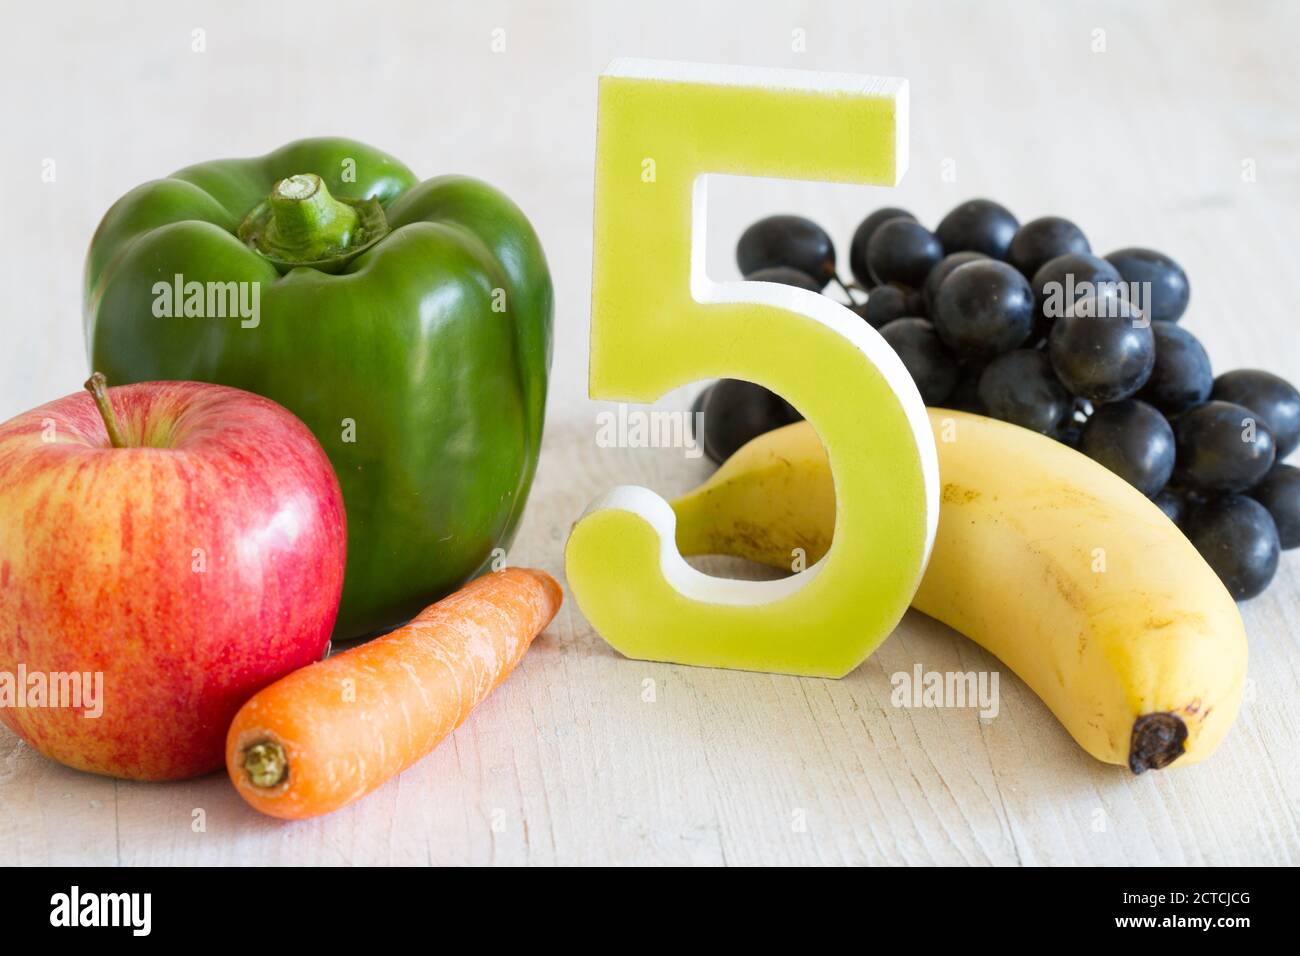 5 Five a day portion with fresh fruits and vegetables healthy diet lifestyle concept Stock Photo